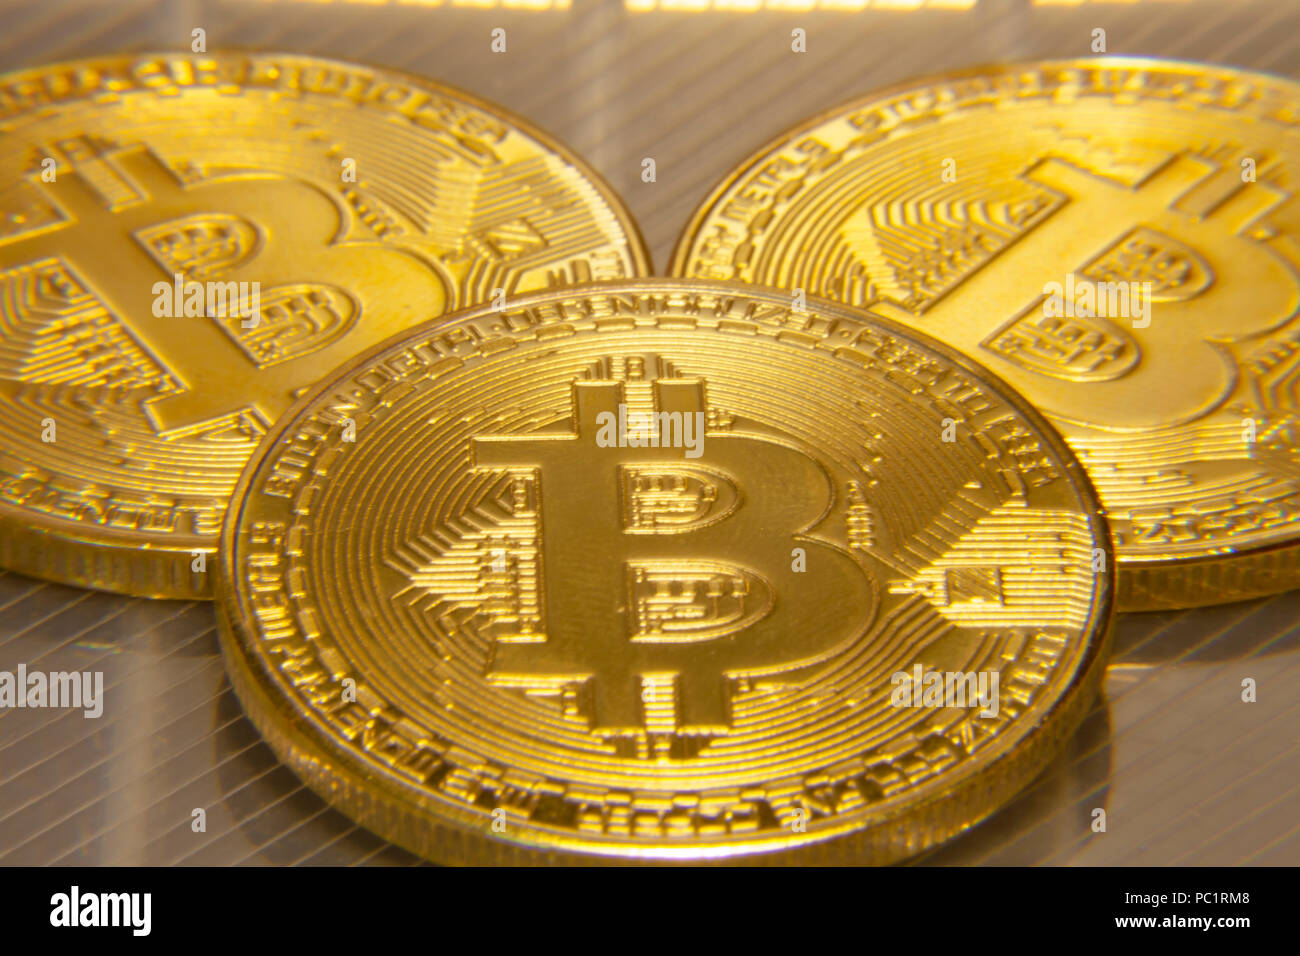 Macro close-up shot: three physical golden bitcoins (digital virtual crypto-currency) on a semi-transparent surface. Stock Photo